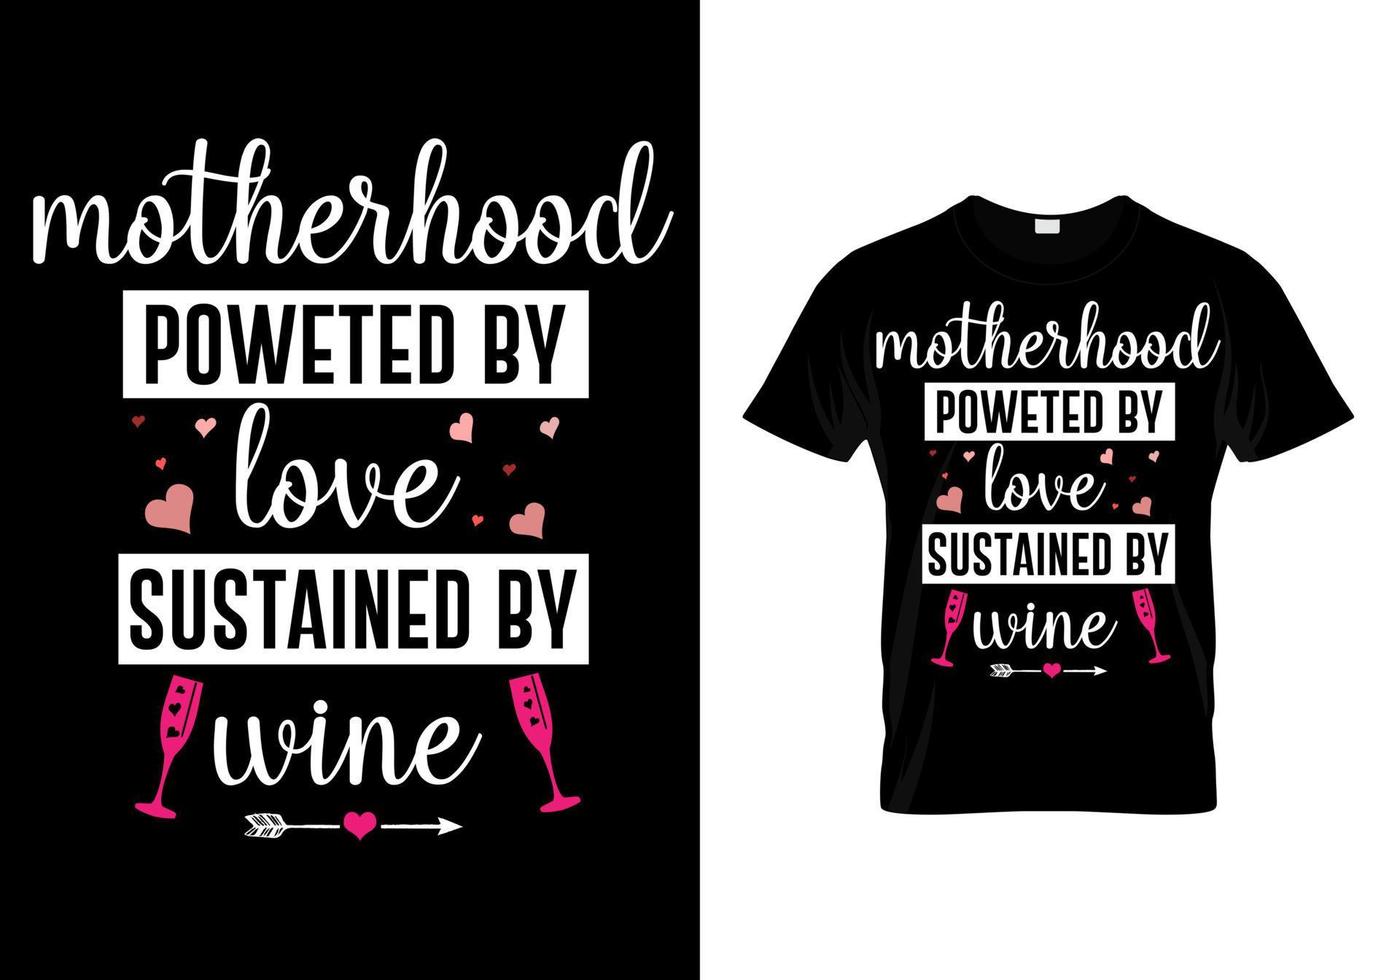 Motherhood powered by love sustained by wine typography t shirt design vector